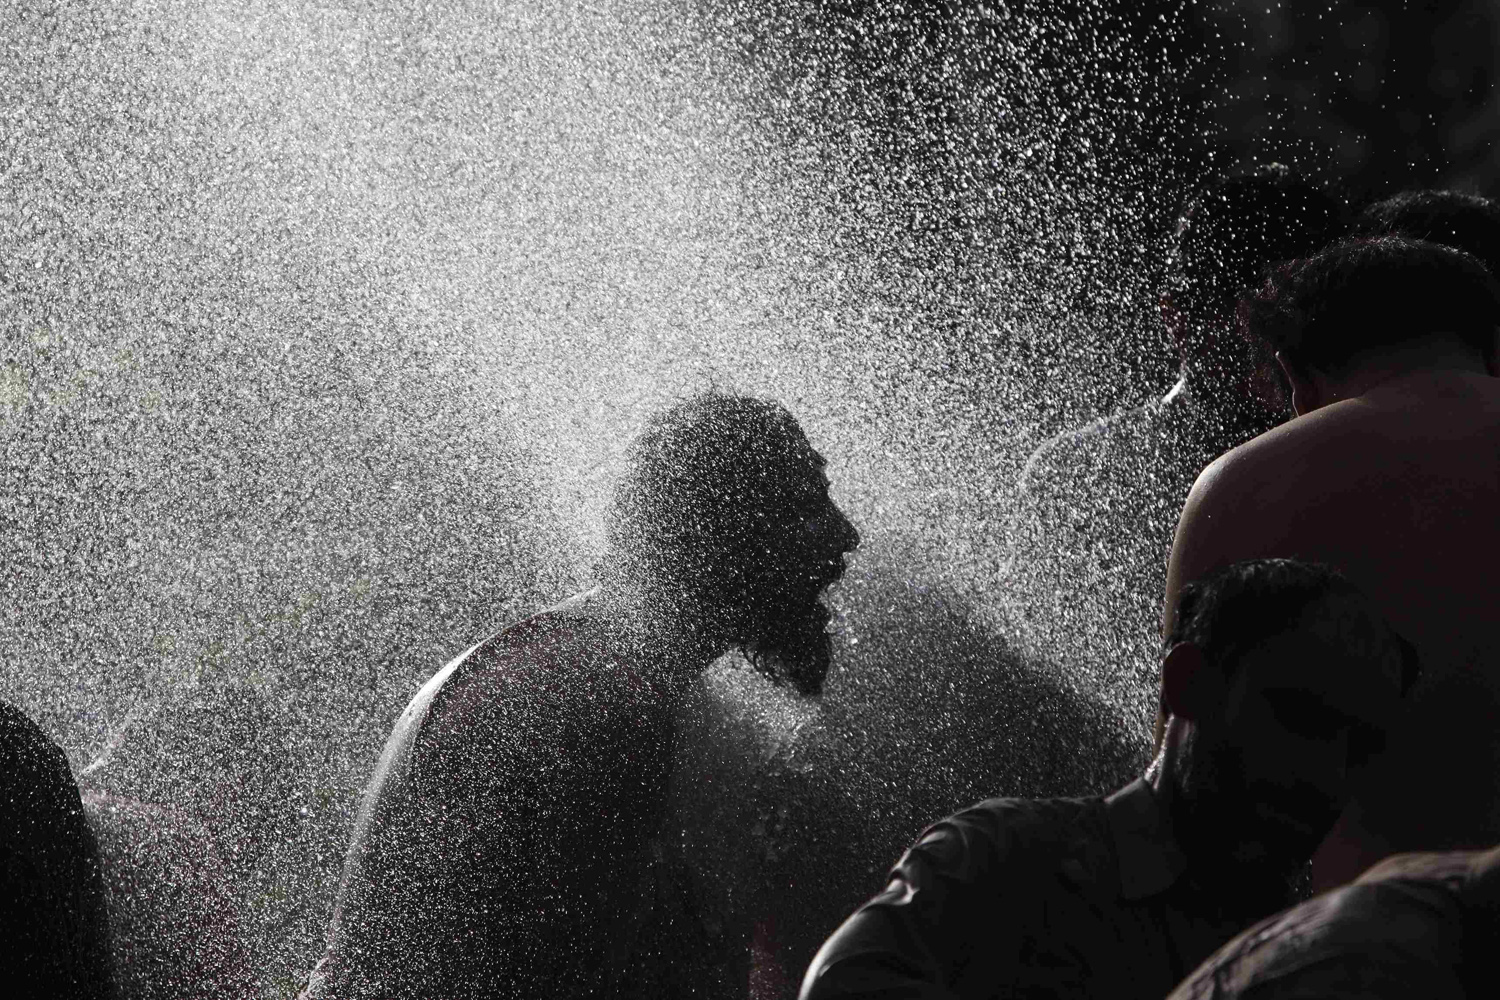 An anti-government protester takes a morning bath with others at a public pump during the Revolution March in Islamabad, Sept. 3, 2014.